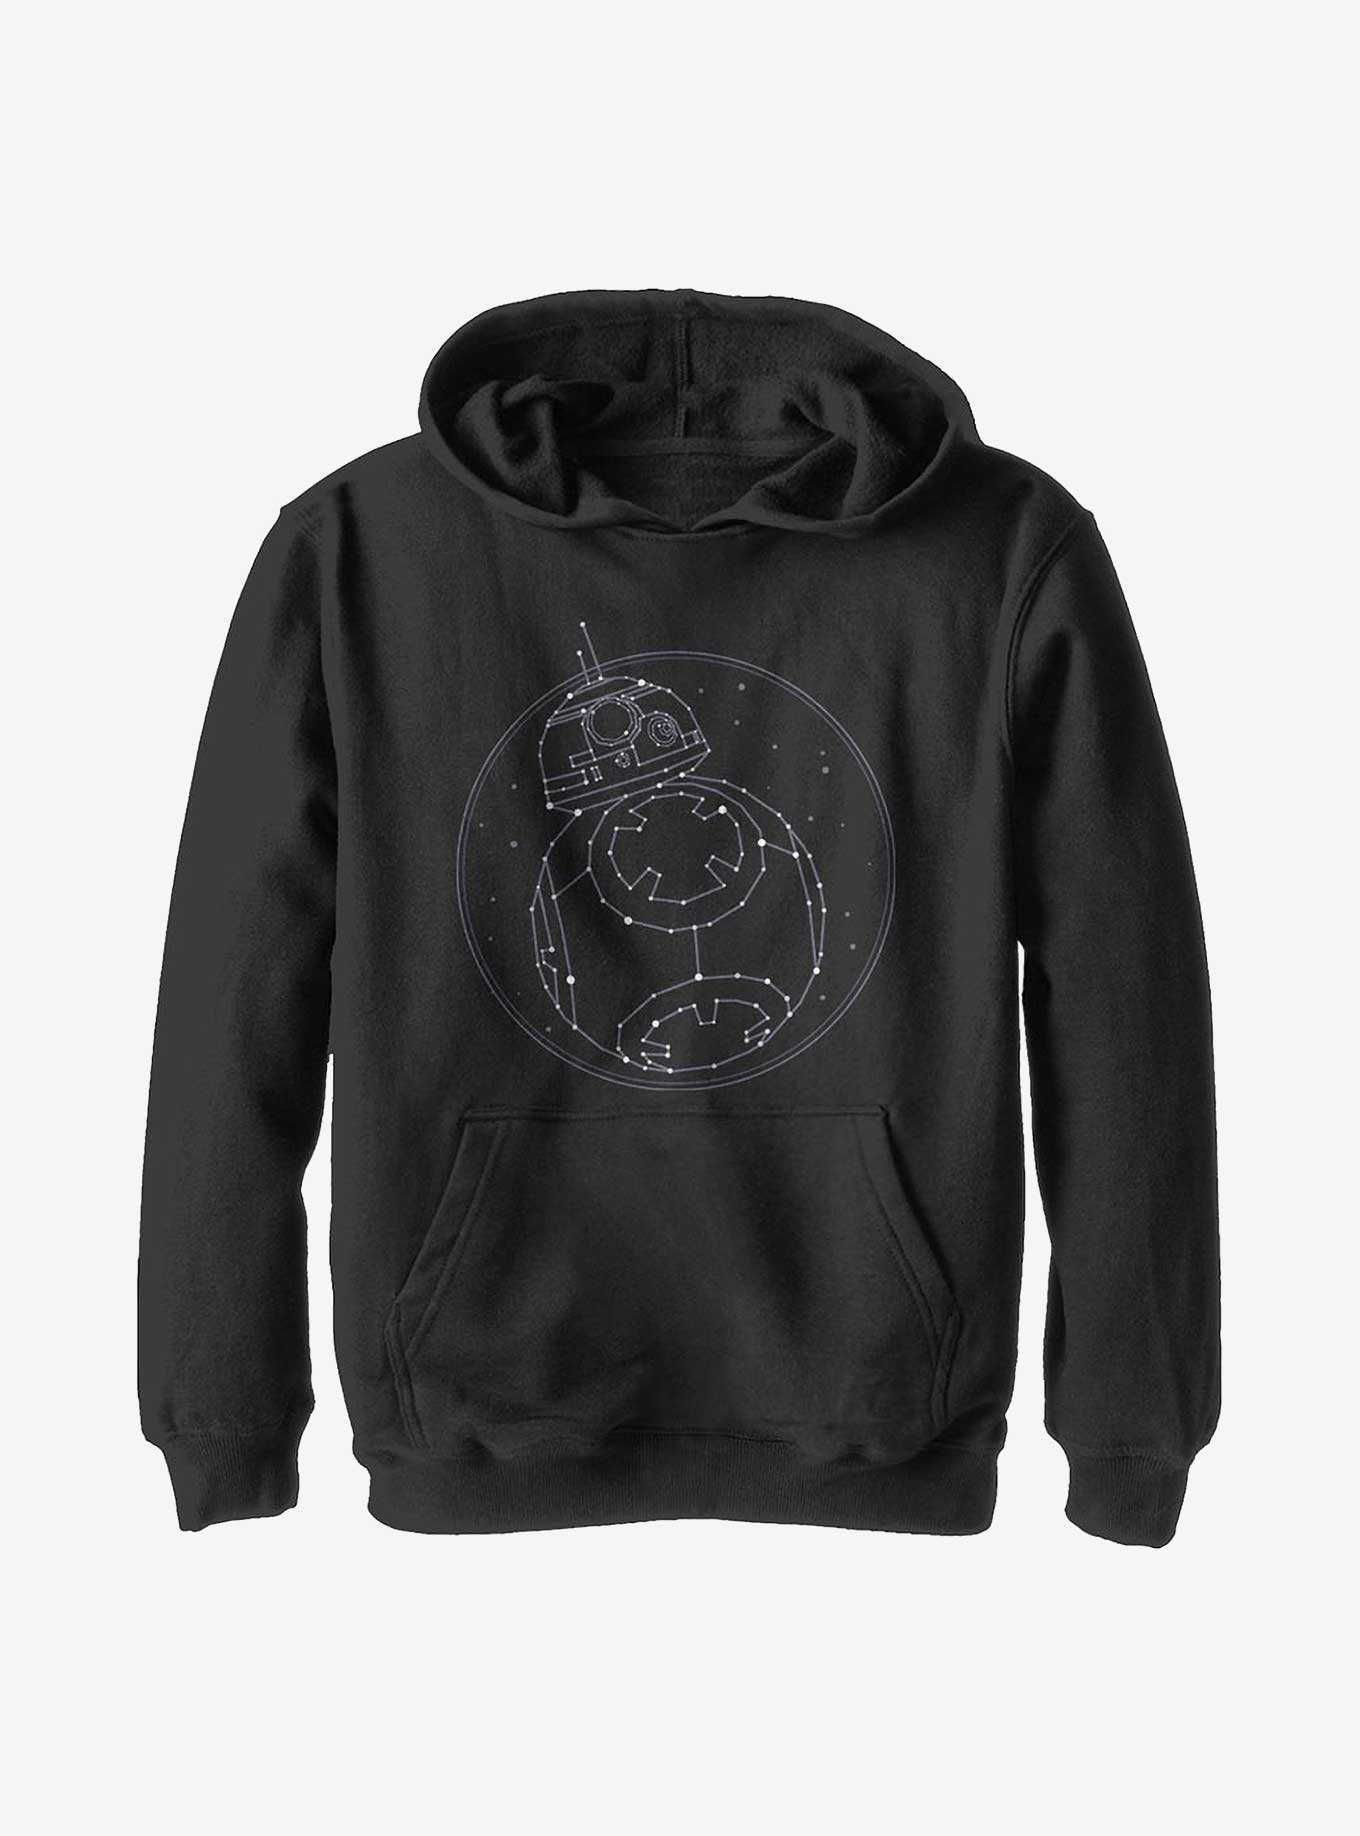 Star Wars Episode IX: The Rise Of Skywalker Constellation Youth Hoodie, , hi-res